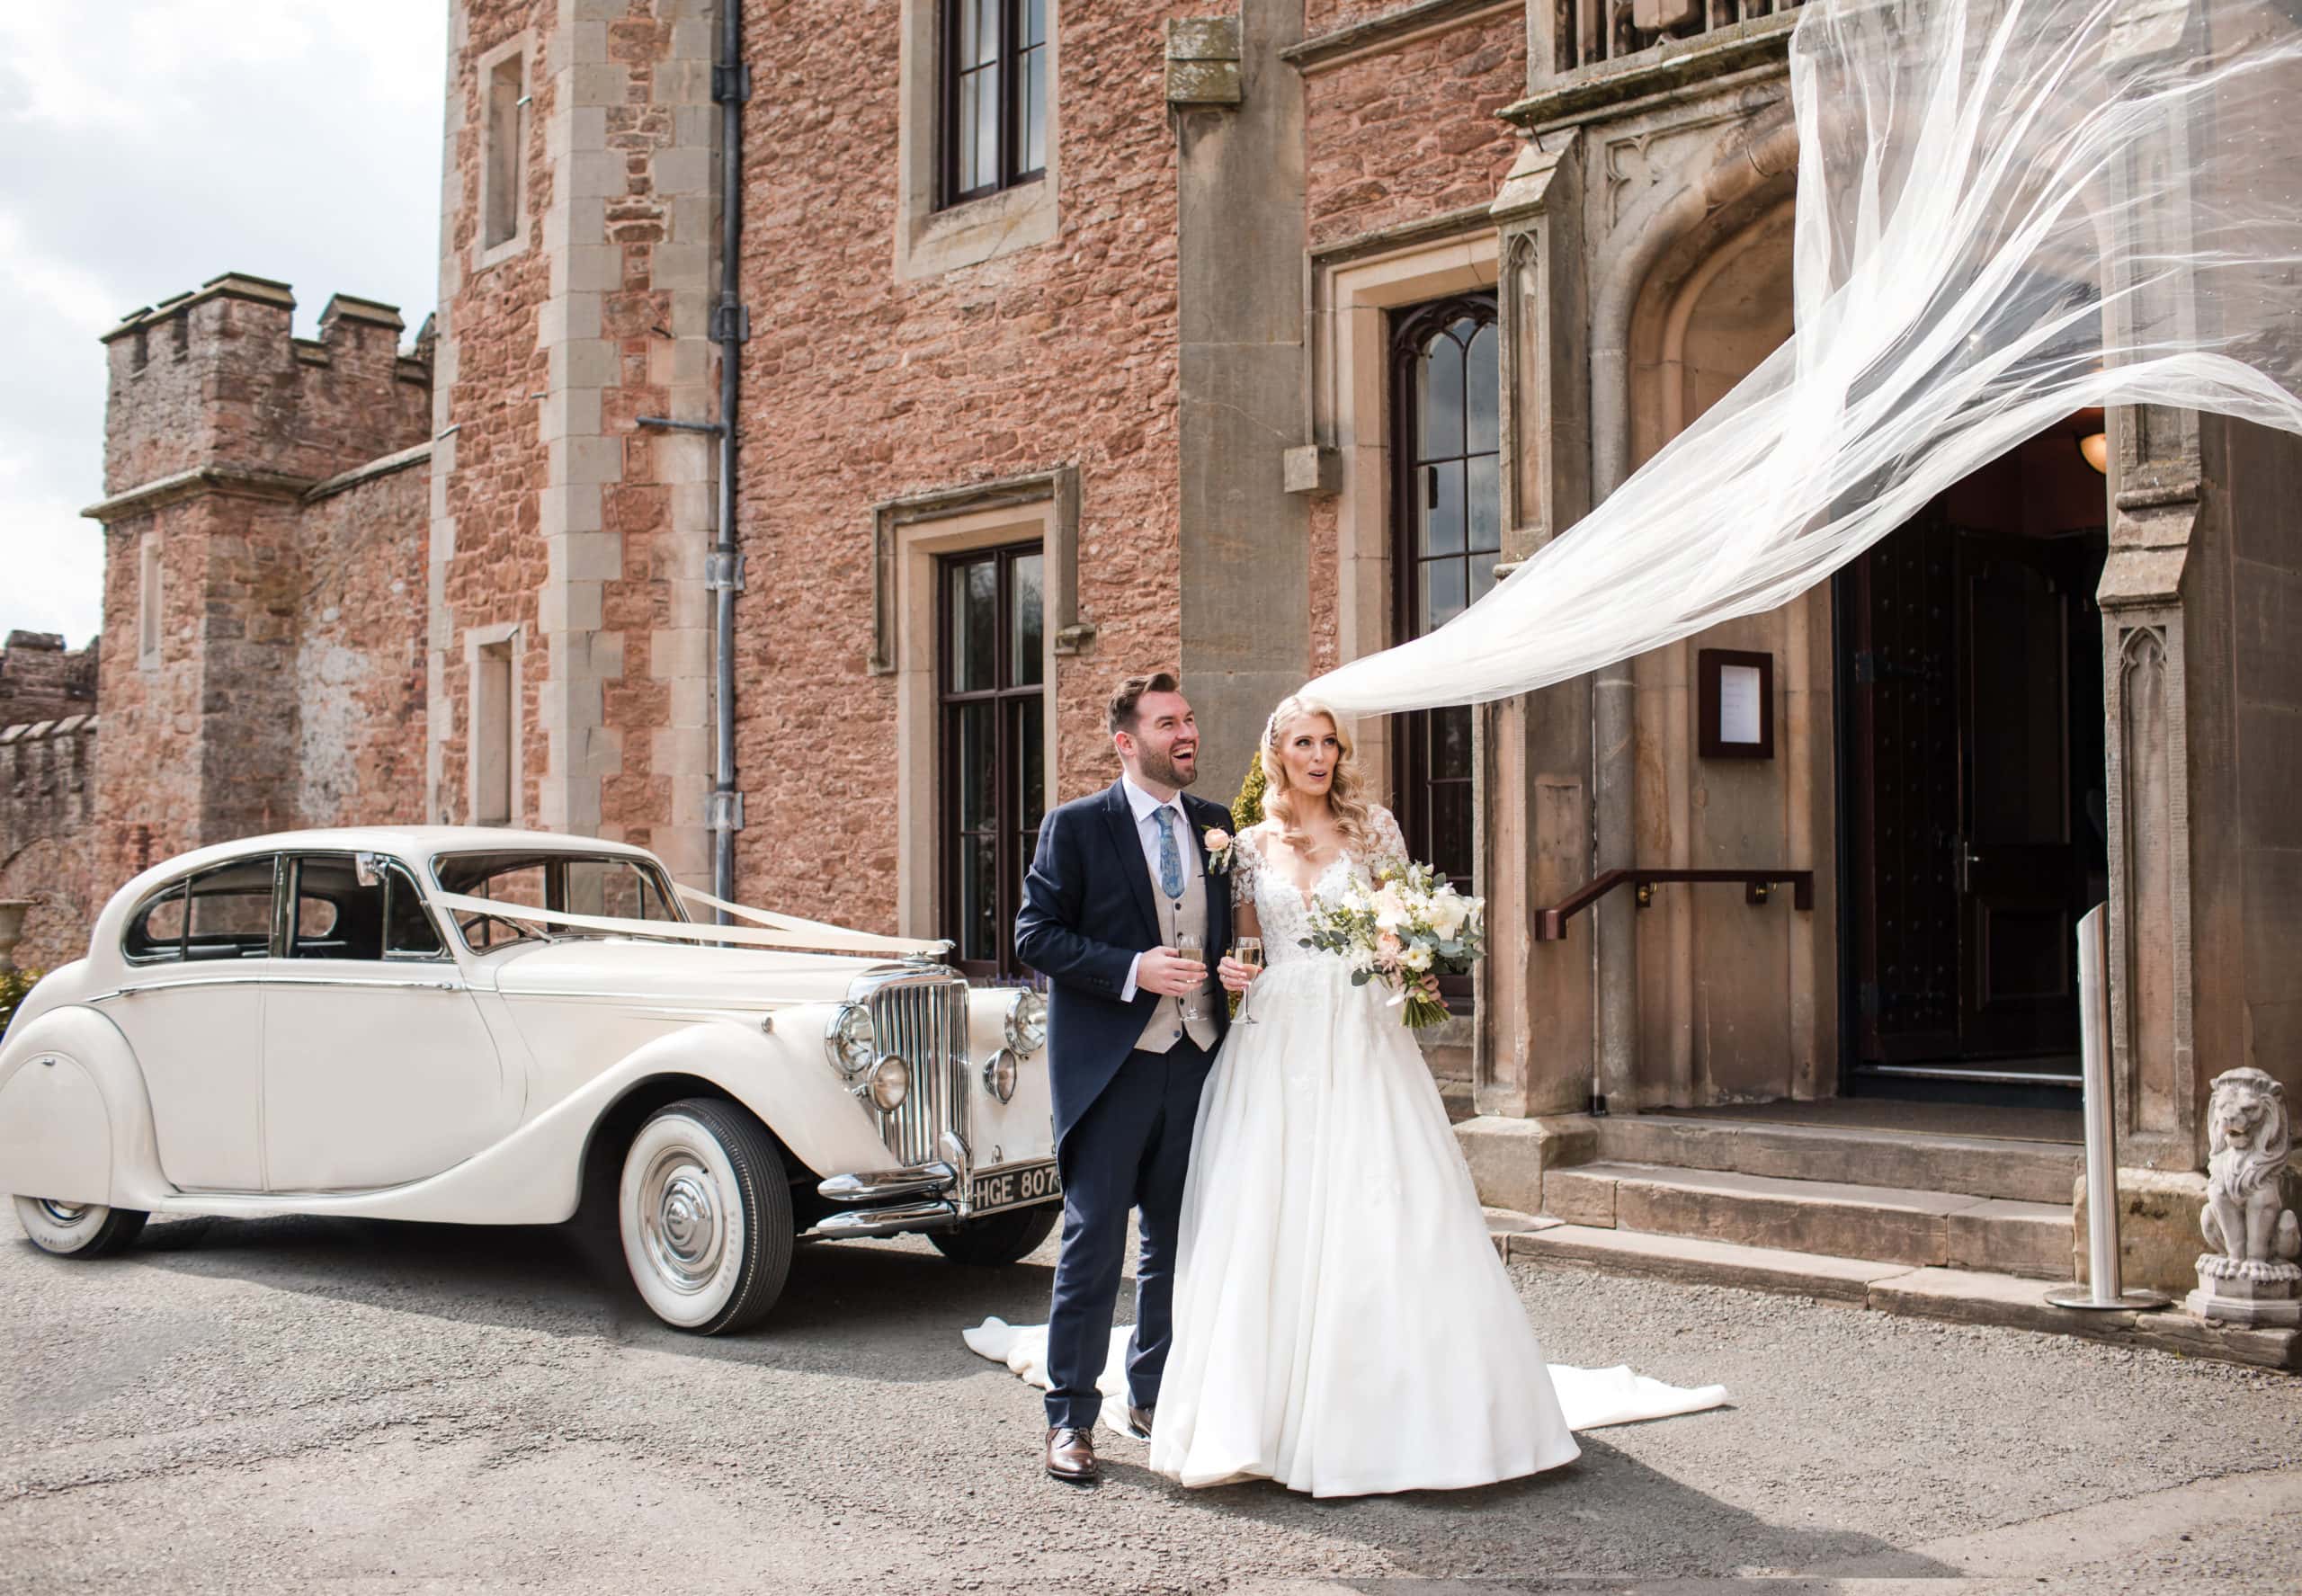 Bride and Groom stand with white vintage wedding car in front of Rowton Castle. Gust of wind blows brides veil into the air